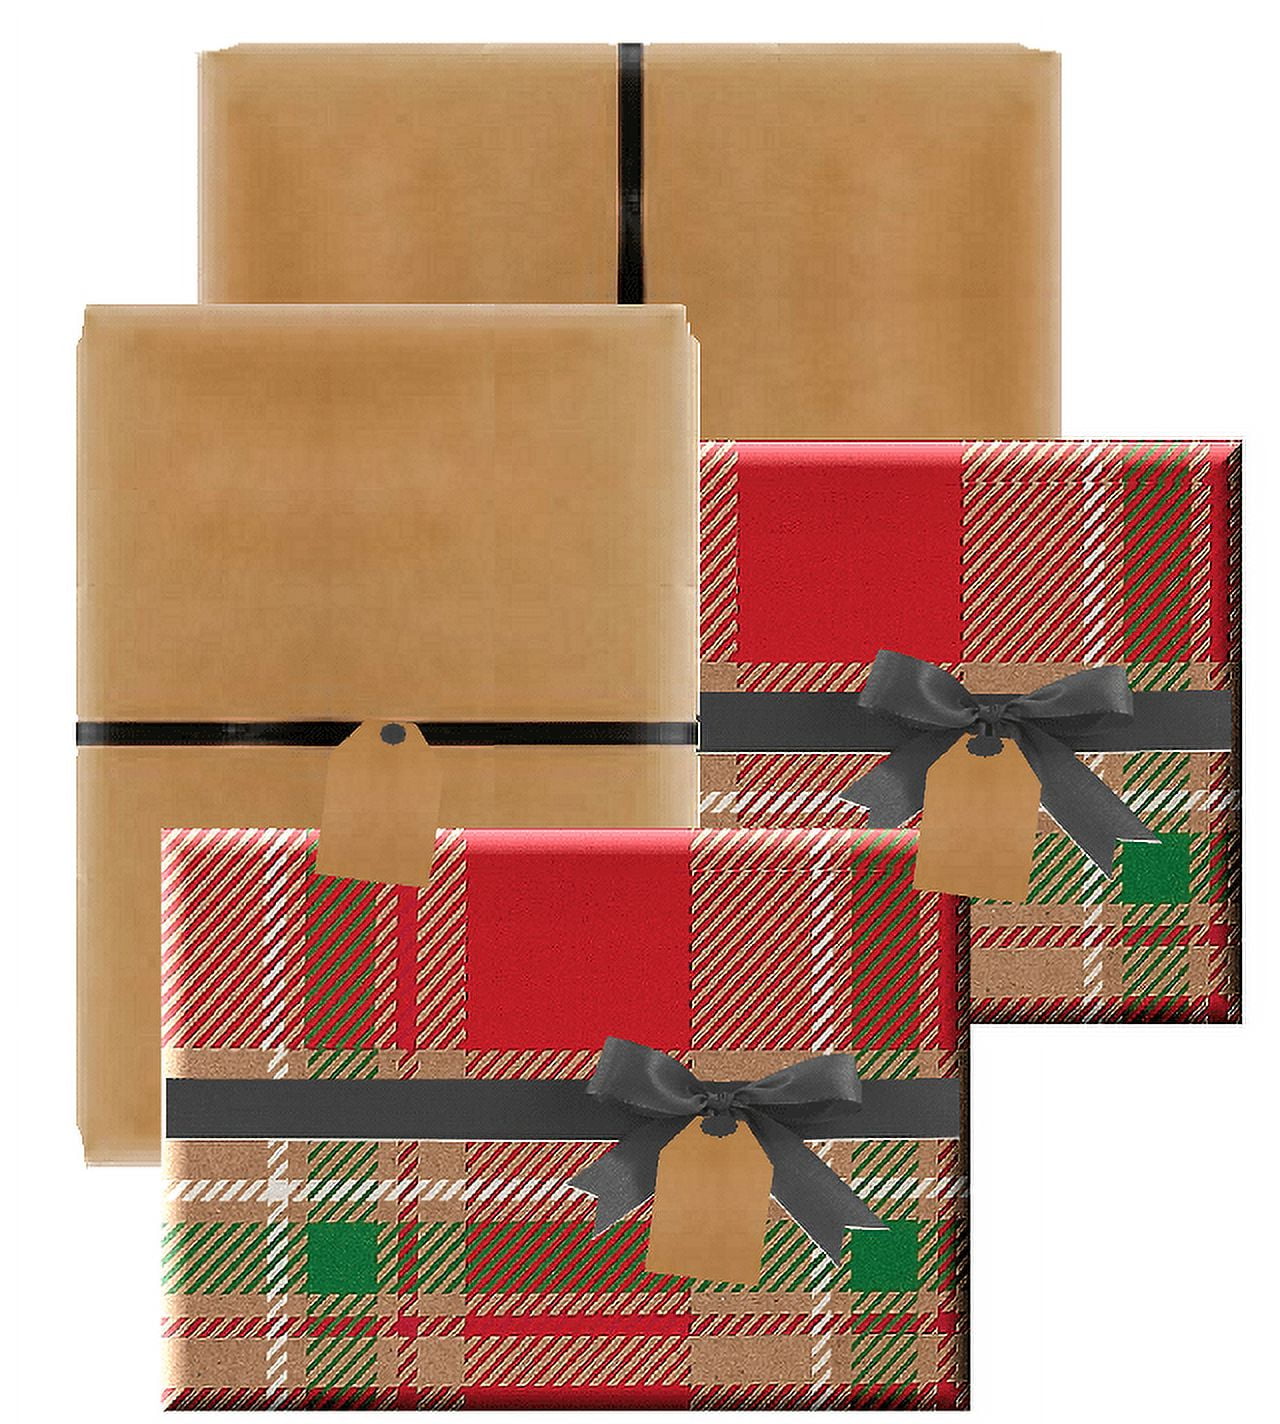  4 Rolls Assorted Premium Gift Wrapping Tissue Paper